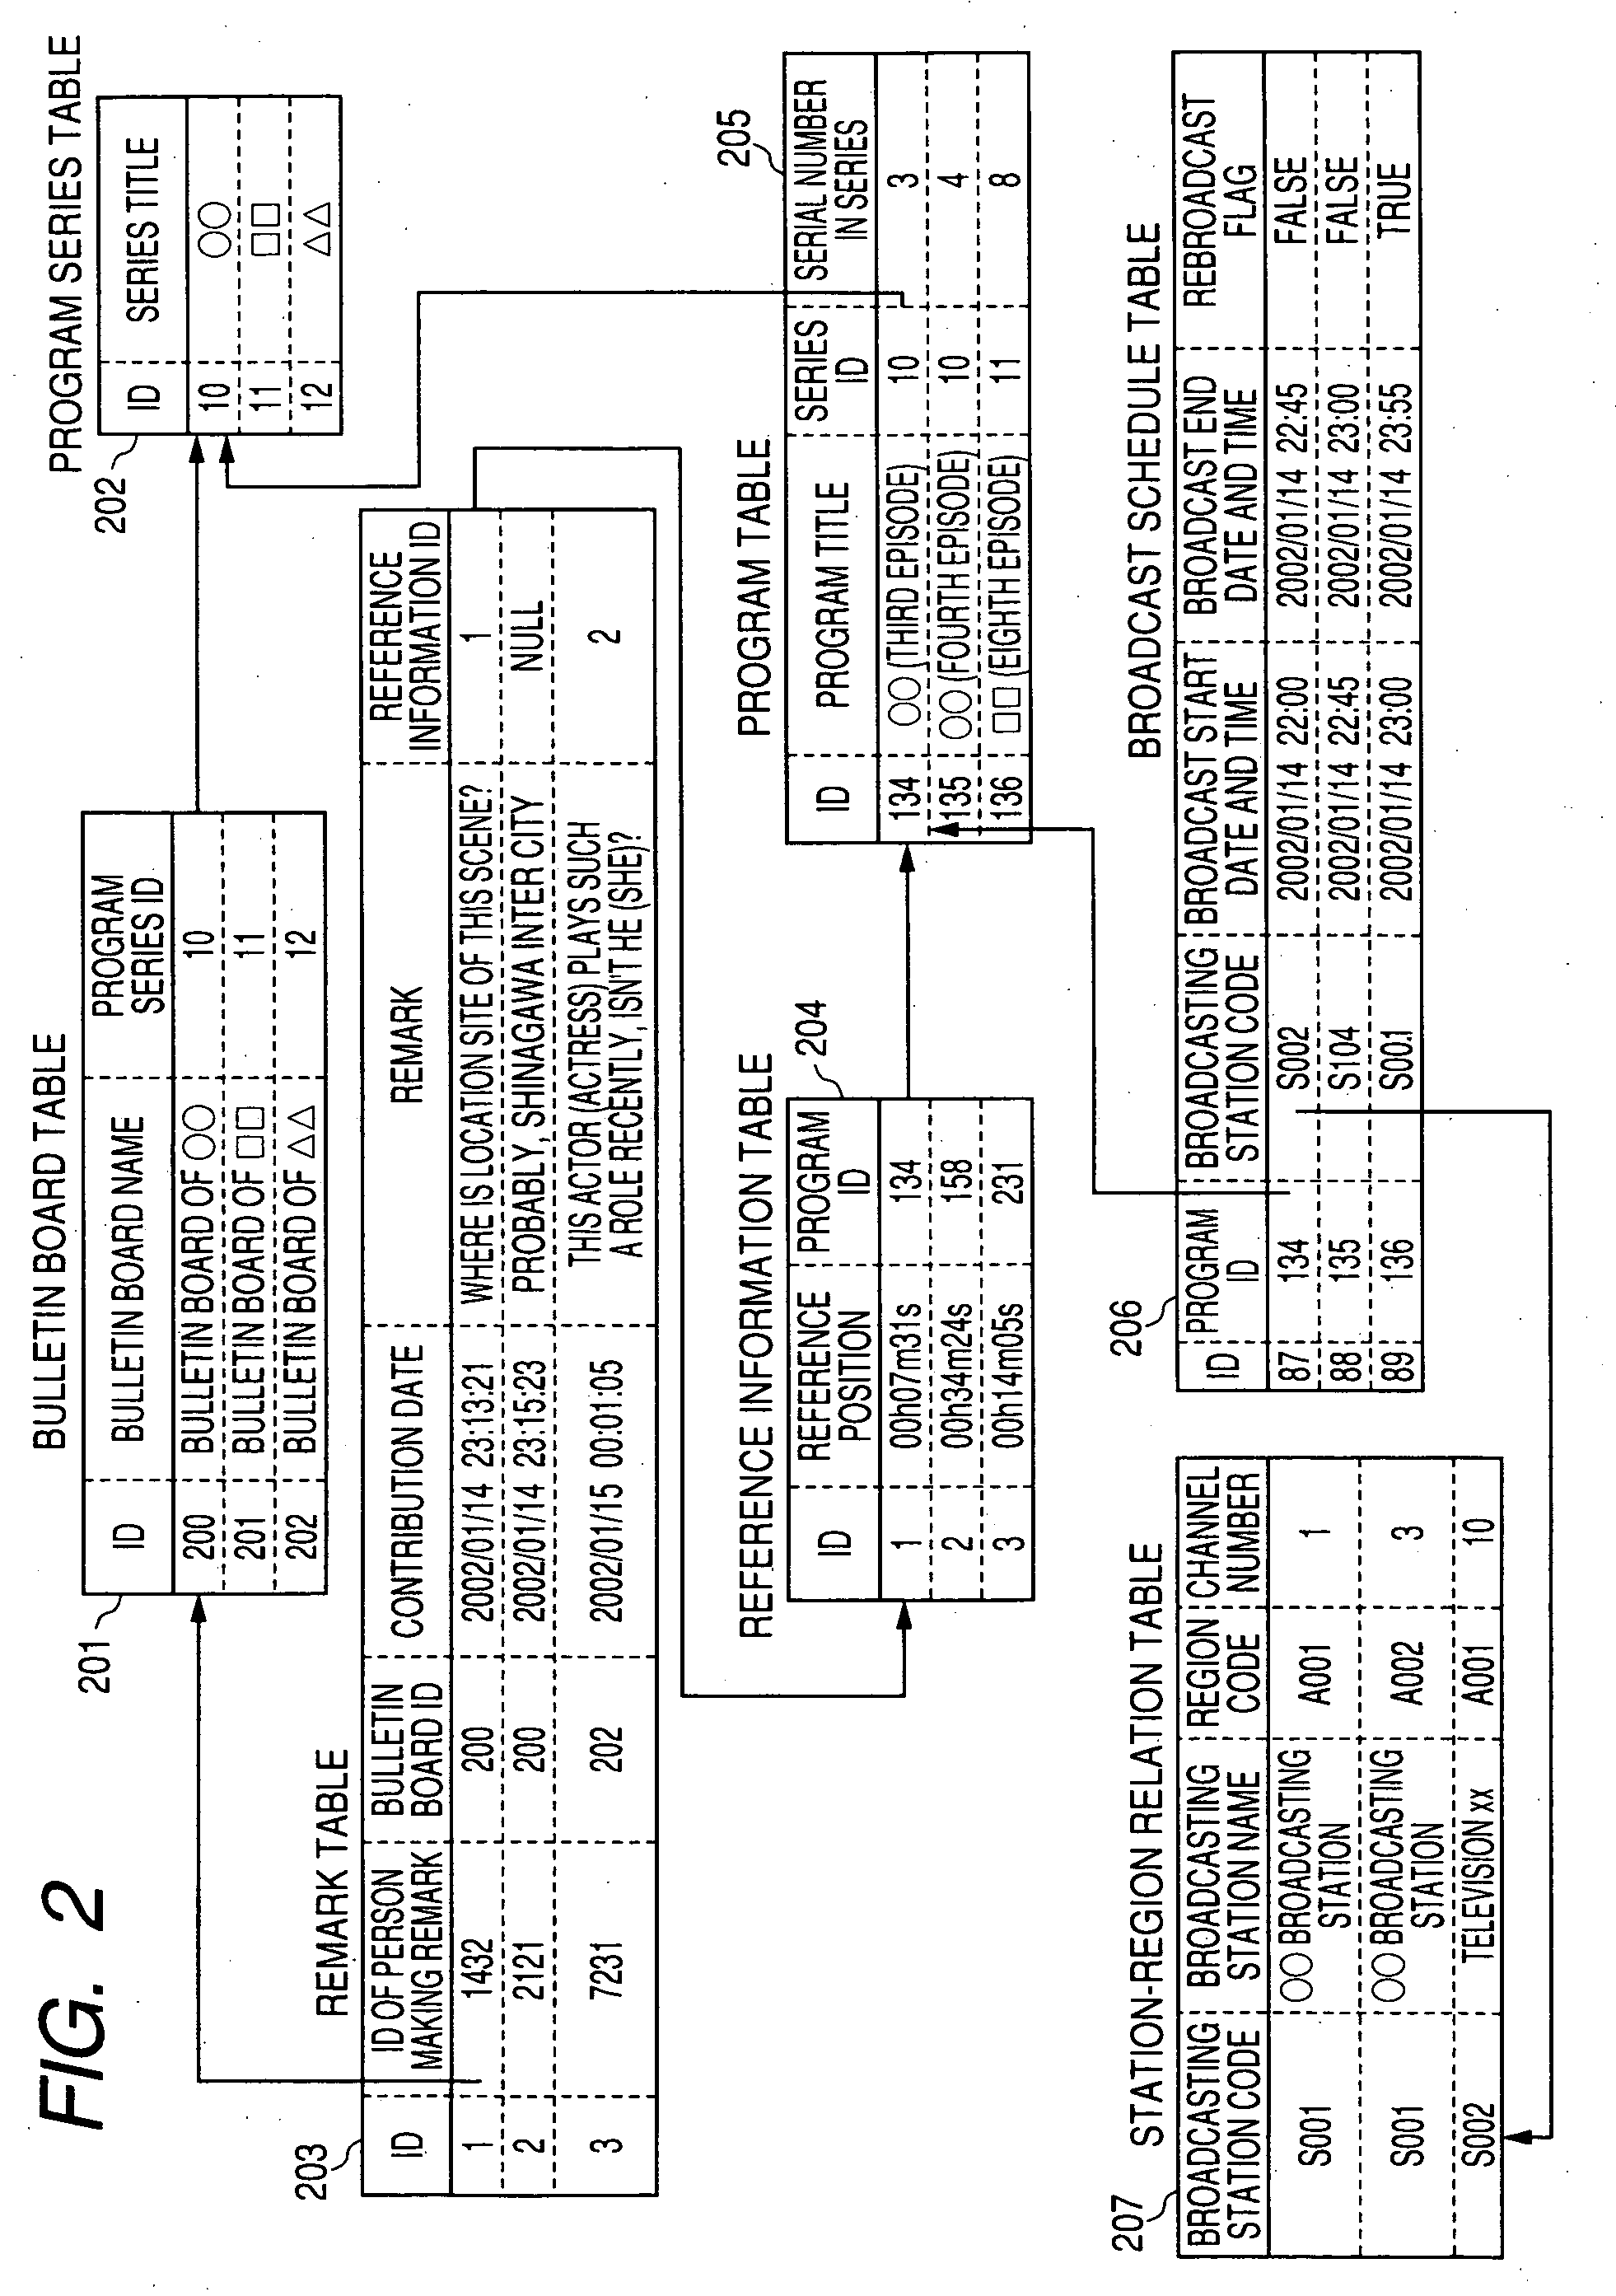 Content-related information providing apparatus, content related information providing method, electronic bulletin board system, and computer program